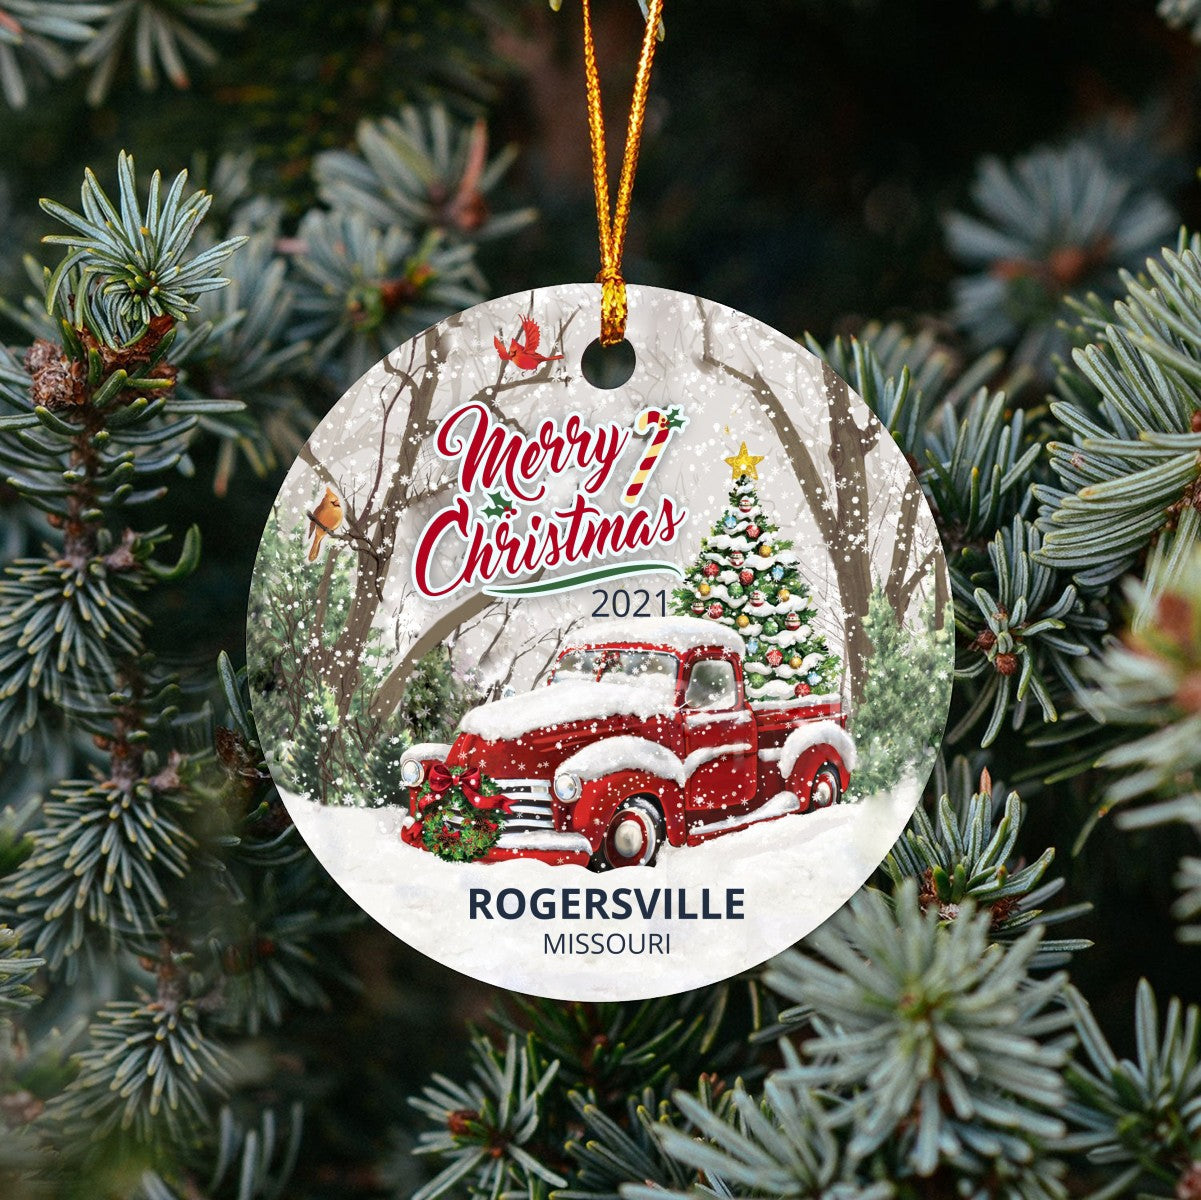 Christmas Tree Ornaments Rogersville - Ornament Customize With Name City And State Rogersville Missouri MO - Red Truck Xmas Ornaments 3'' Plastic Gift For Family, Friend And Housewarming